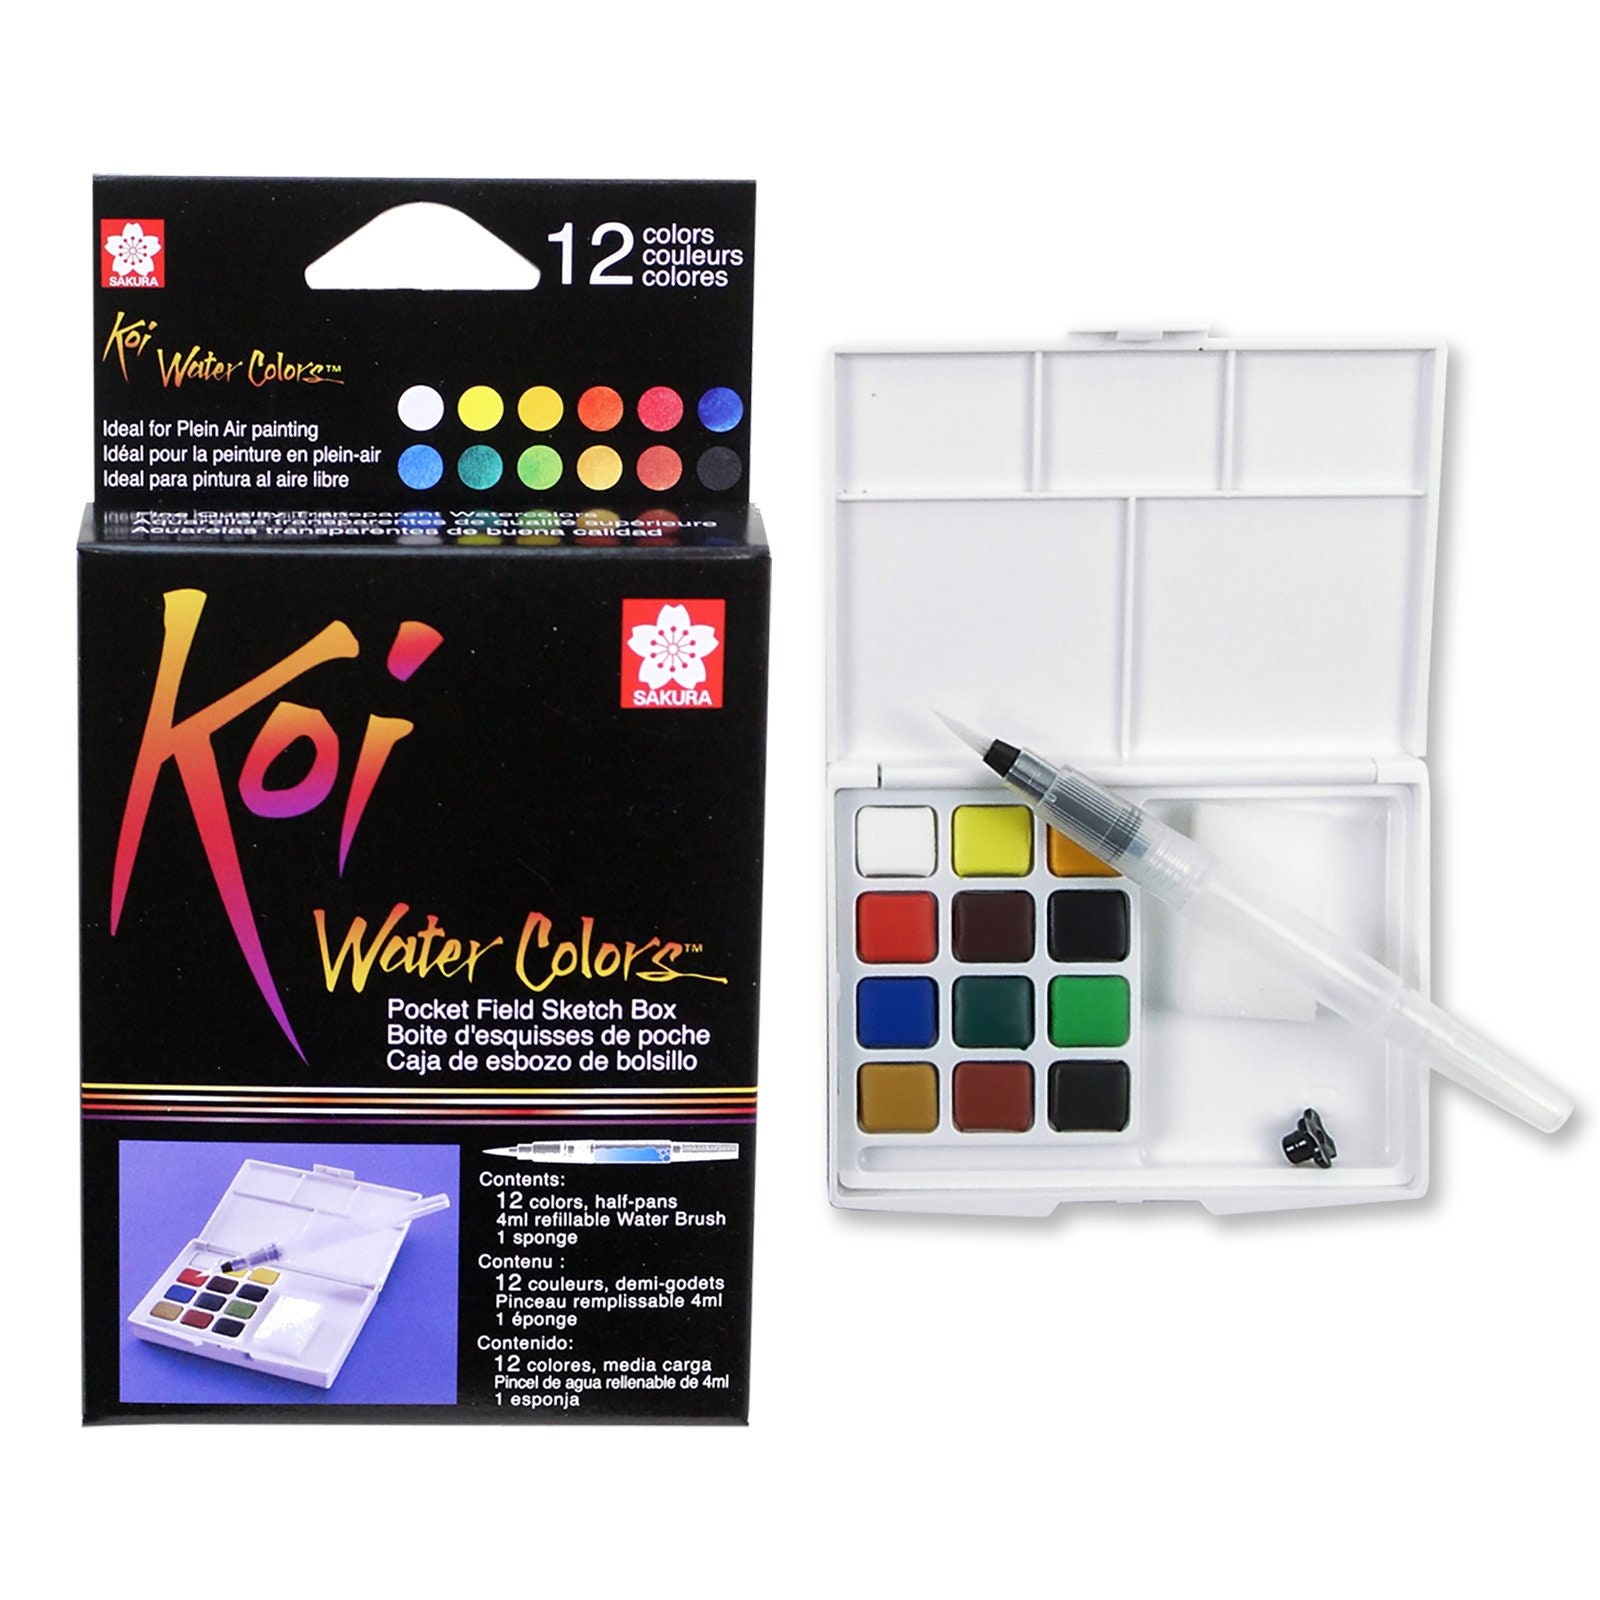 Handmade watercolor paint - PARTY KIT includes all our blues - 10